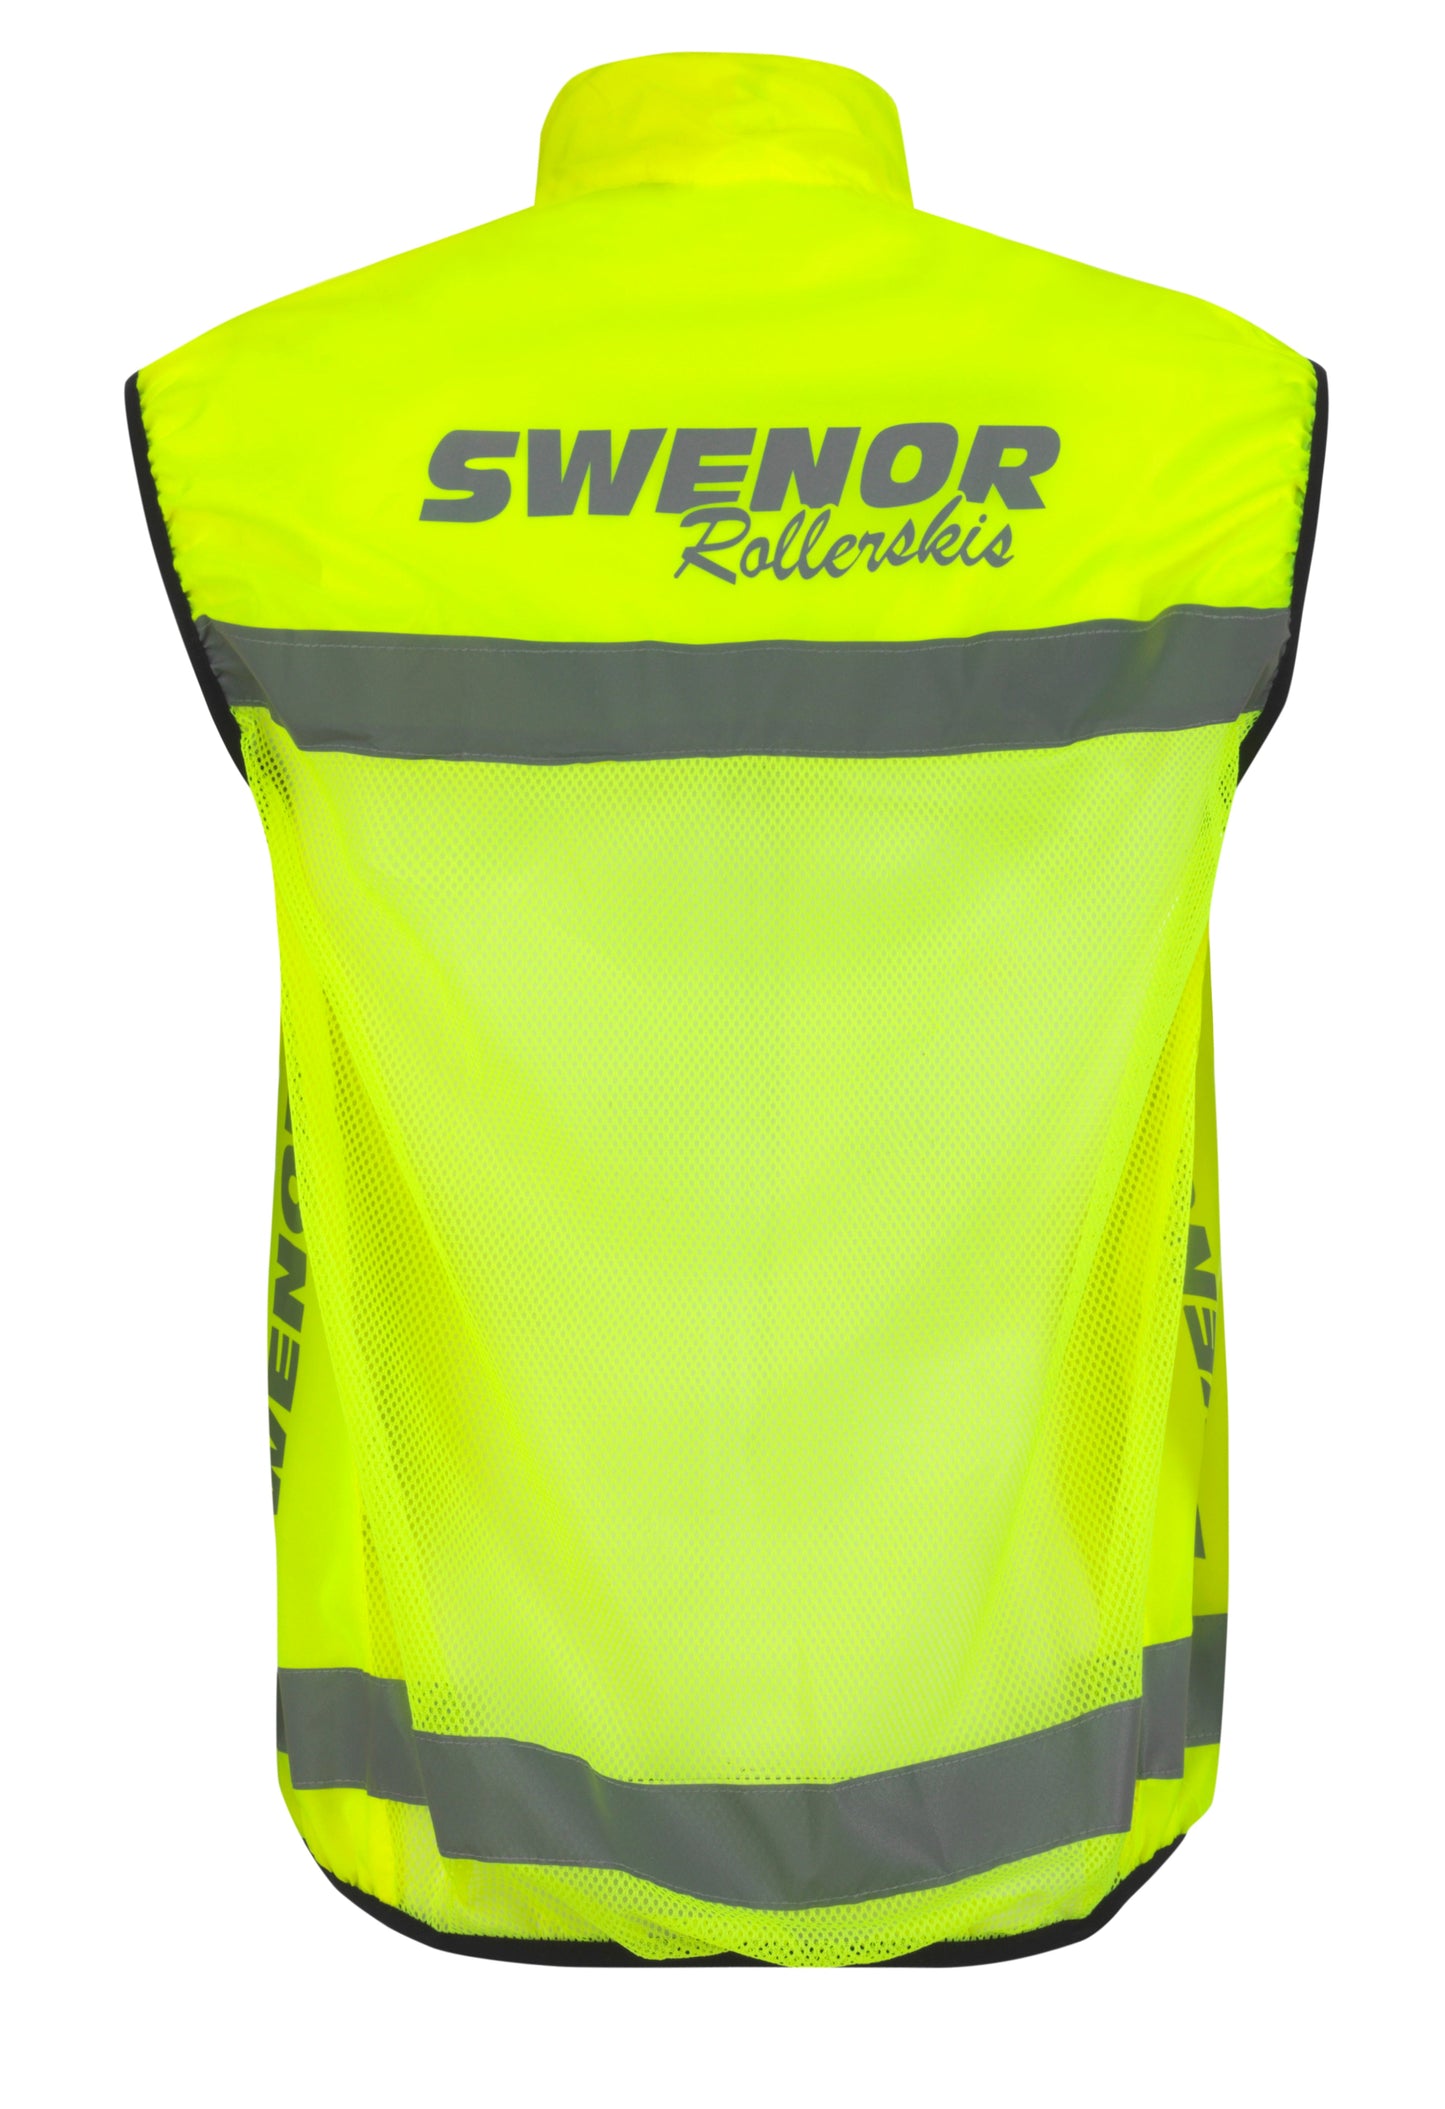 A product picture of the Swenor Kids Roller Ski Vest